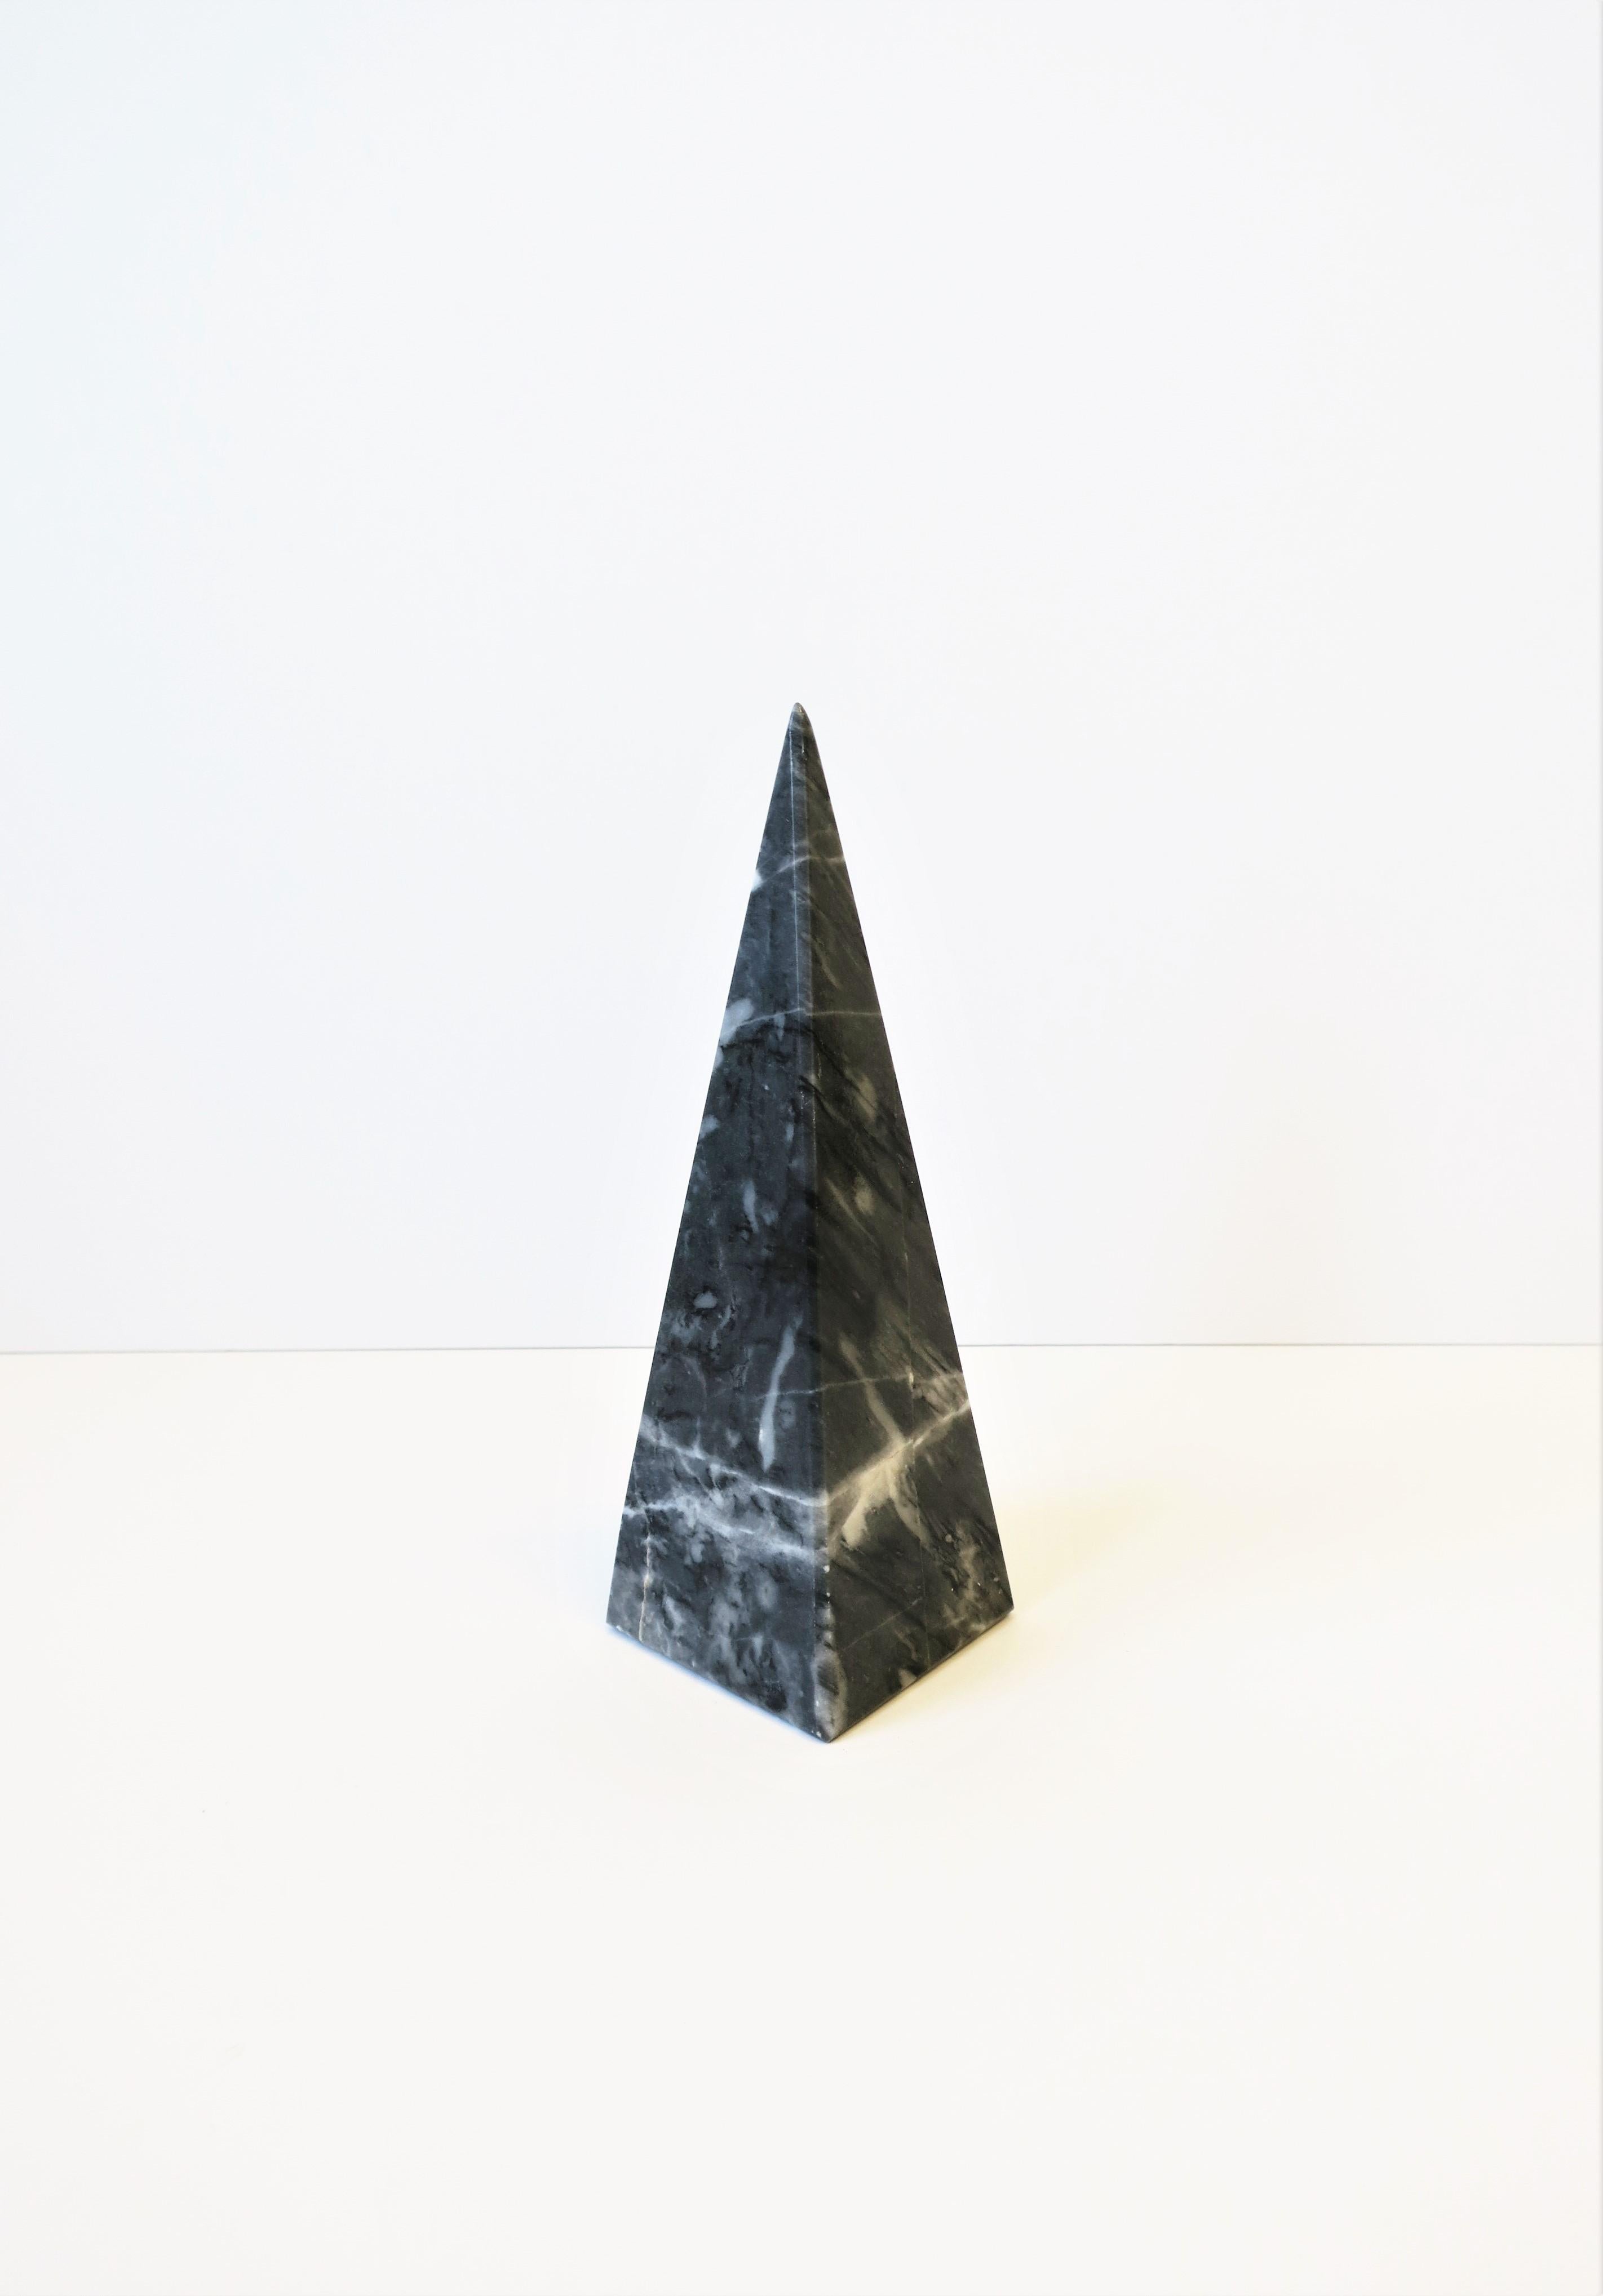 Black and White Marble Pyramid Obelisk Style Decorative Object In Good Condition For Sale In New York, NY